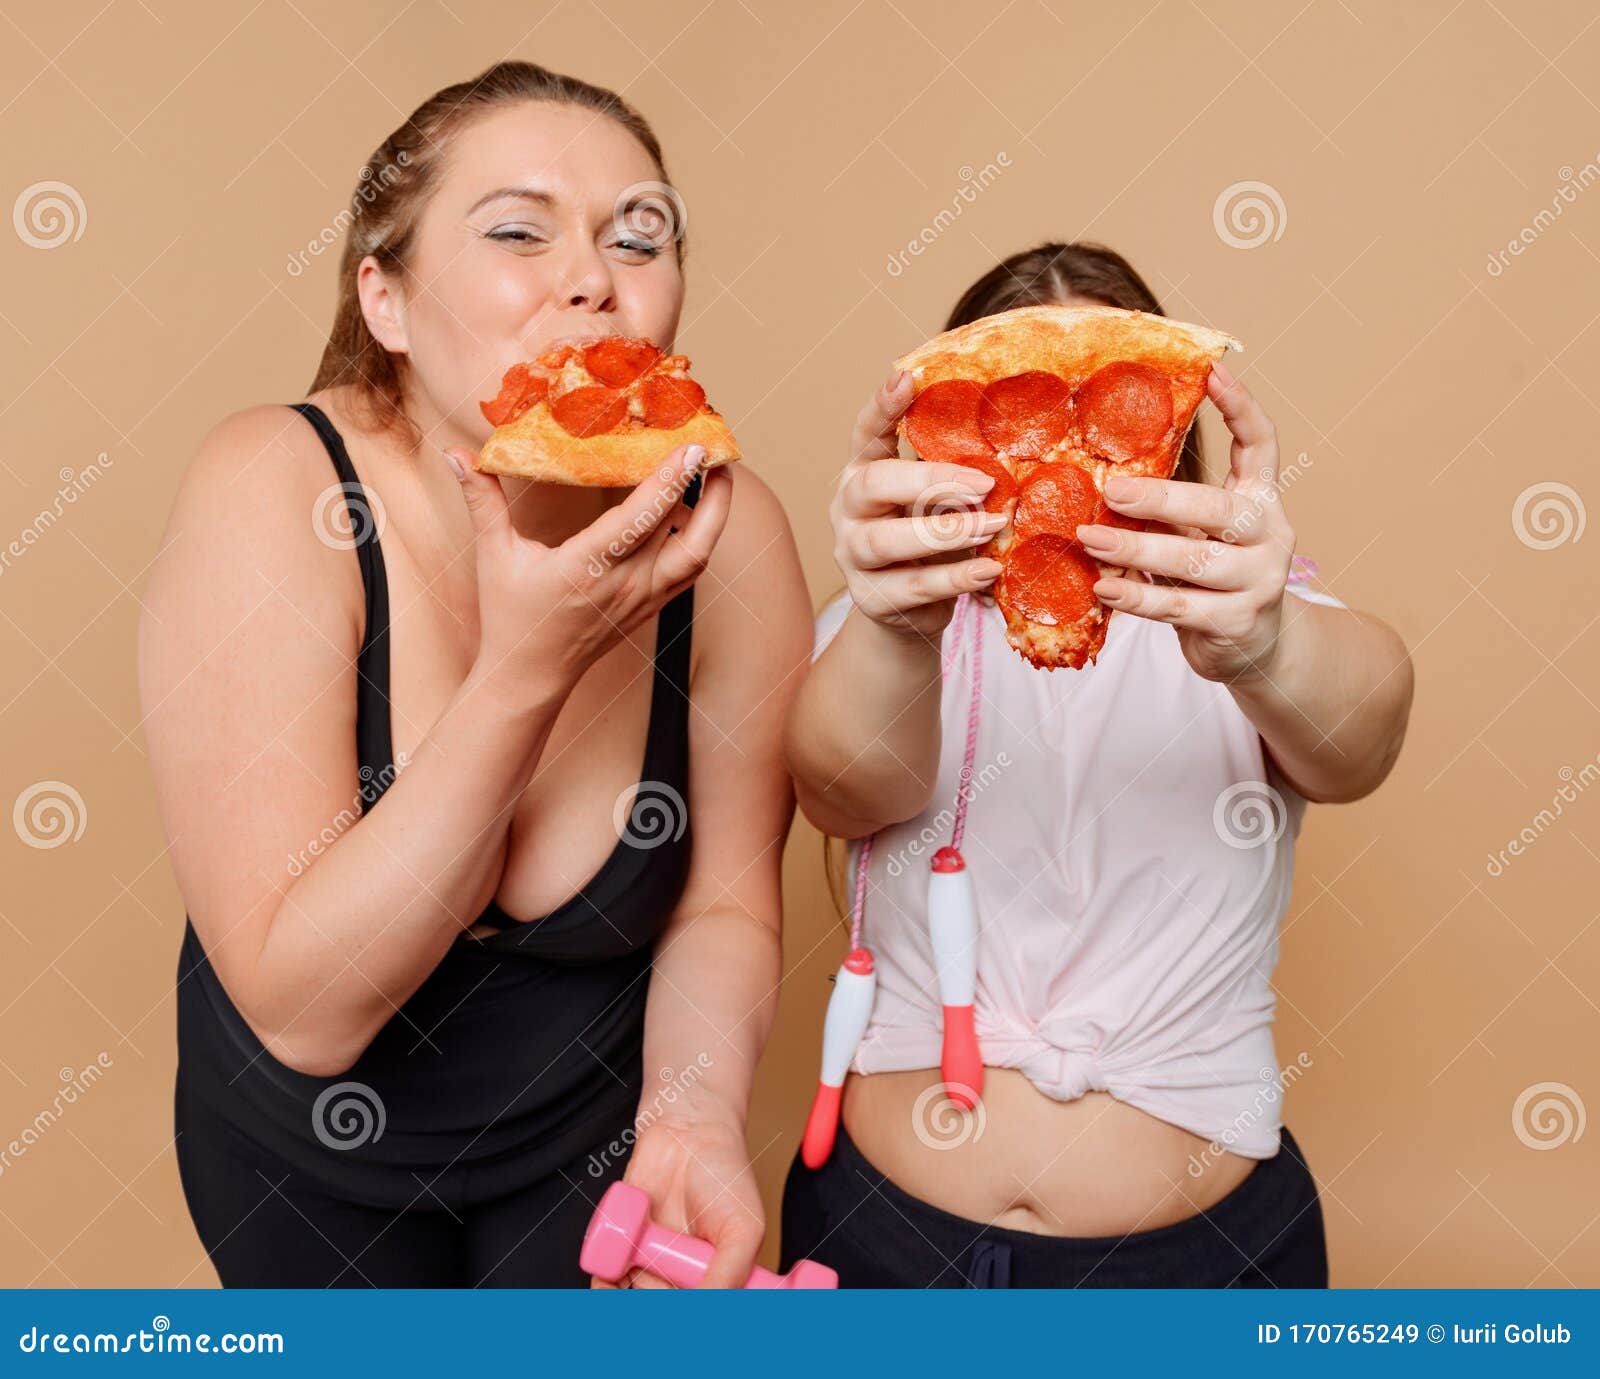 Fat Women Gorging Pizza And Failing Their Diet Stock Image